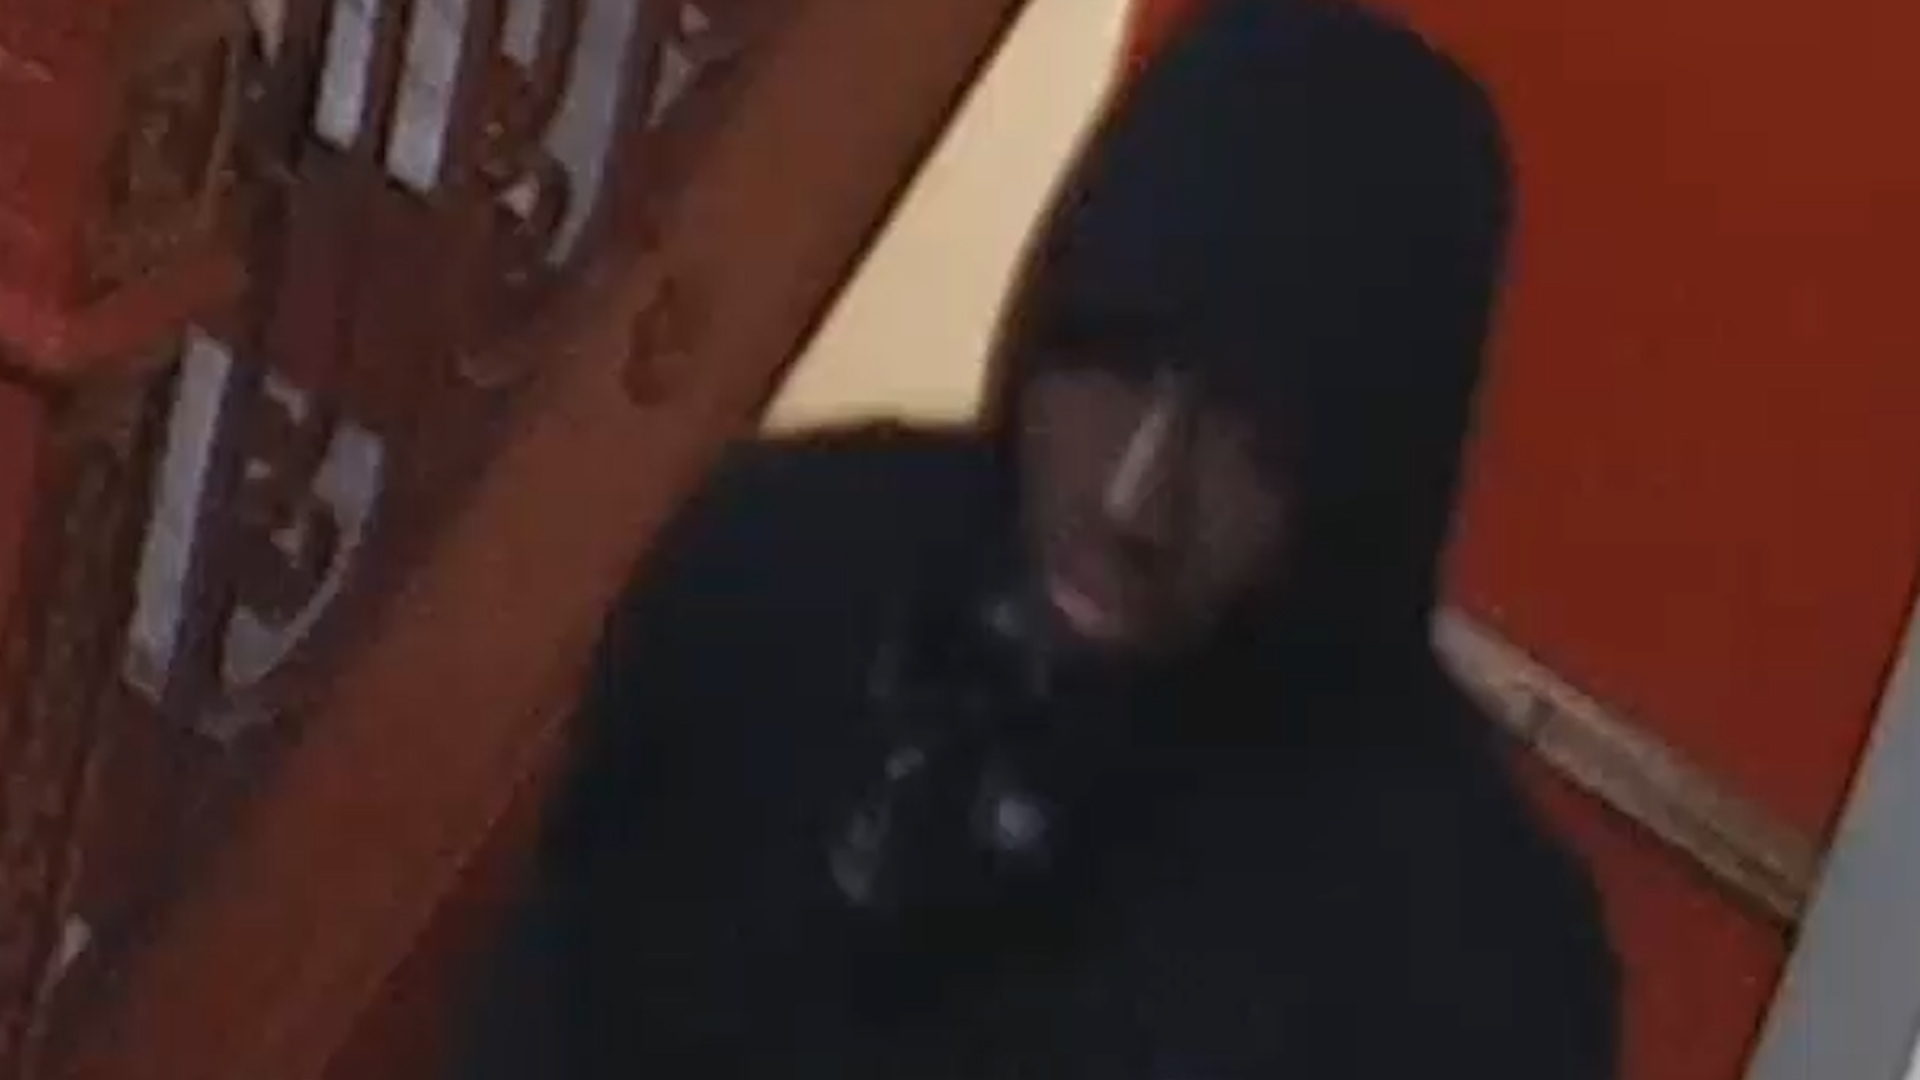 Masked man rapes 70-year-old Bronx woman at gunpoint, suspect caught on video lurking in building